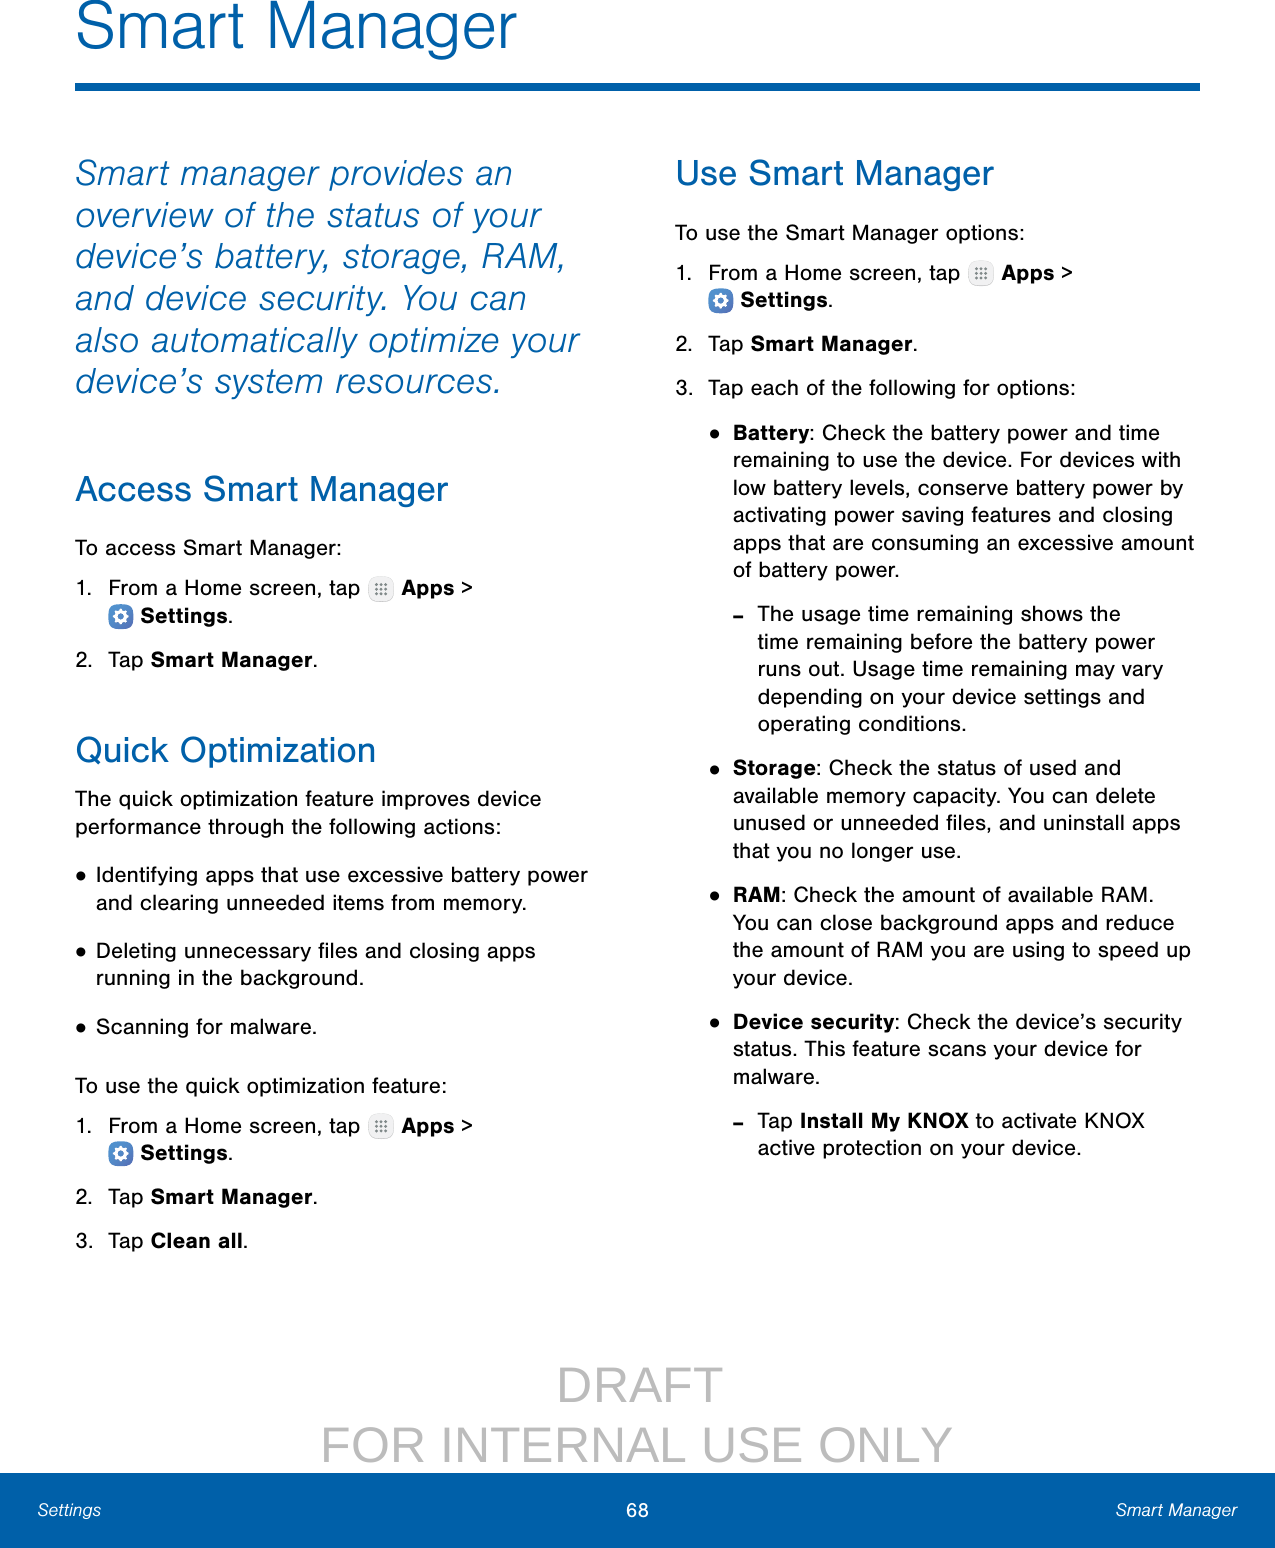                  DRAFT FOR INTERNAL USE ONLY68 Smart ManagerSettingsSmart ManagerSmart manager provides an overview of the status of your device’s battery, storage, RAM, and device security. You can also automatically optimize your device’s system resources.Access Smart ManagerTo access SmartManager:1.  From a Home screen, tap   Apps &gt; Settings.2.  Tap SmartManager.Quick OptimizationThe quick optimization feature improves device performance through the following actions:• Identifying apps that use excessive battery power and clearing unneeded items from memory.• Deleting unnecessary ﬁles and closing apps running in the background.• Scanning for malware.To use the quick optimization feature:1.  From a Home screen, tap   Apps &gt; Settings.2.  Tap SmartManager.3.  Tap Clean all.Use Smart ManagerTo use the SmartManager options:1.  From a Home screen, tap   Apps &gt; Settings.2.  Tap SmartManager.3.  Tap each of the following for options:• Battery: Check the battery power and time remaining to use the device. For devices with low battery levels, conserve battery power by activating power saving features and closing apps that are consuming an excessive amount of battery power. ‑The usage time remaining shows the time remaining before the battery power runs out. Usage time remaining may vary depending on your device settings and operating conditions.• Storage: Check the status of used and available memory capacity. You can delete unused or unneeded ﬁles, and uninstall apps that you no longer use.• RAM: Check the amount of available RAM. You can close background apps and reduce the amount of RAM you are using to speed up your device.• Device security: Check the device’s security status. This feature scans your device for malware. ‑Tap Install My KNOX to activate KNOX active protection on your device.